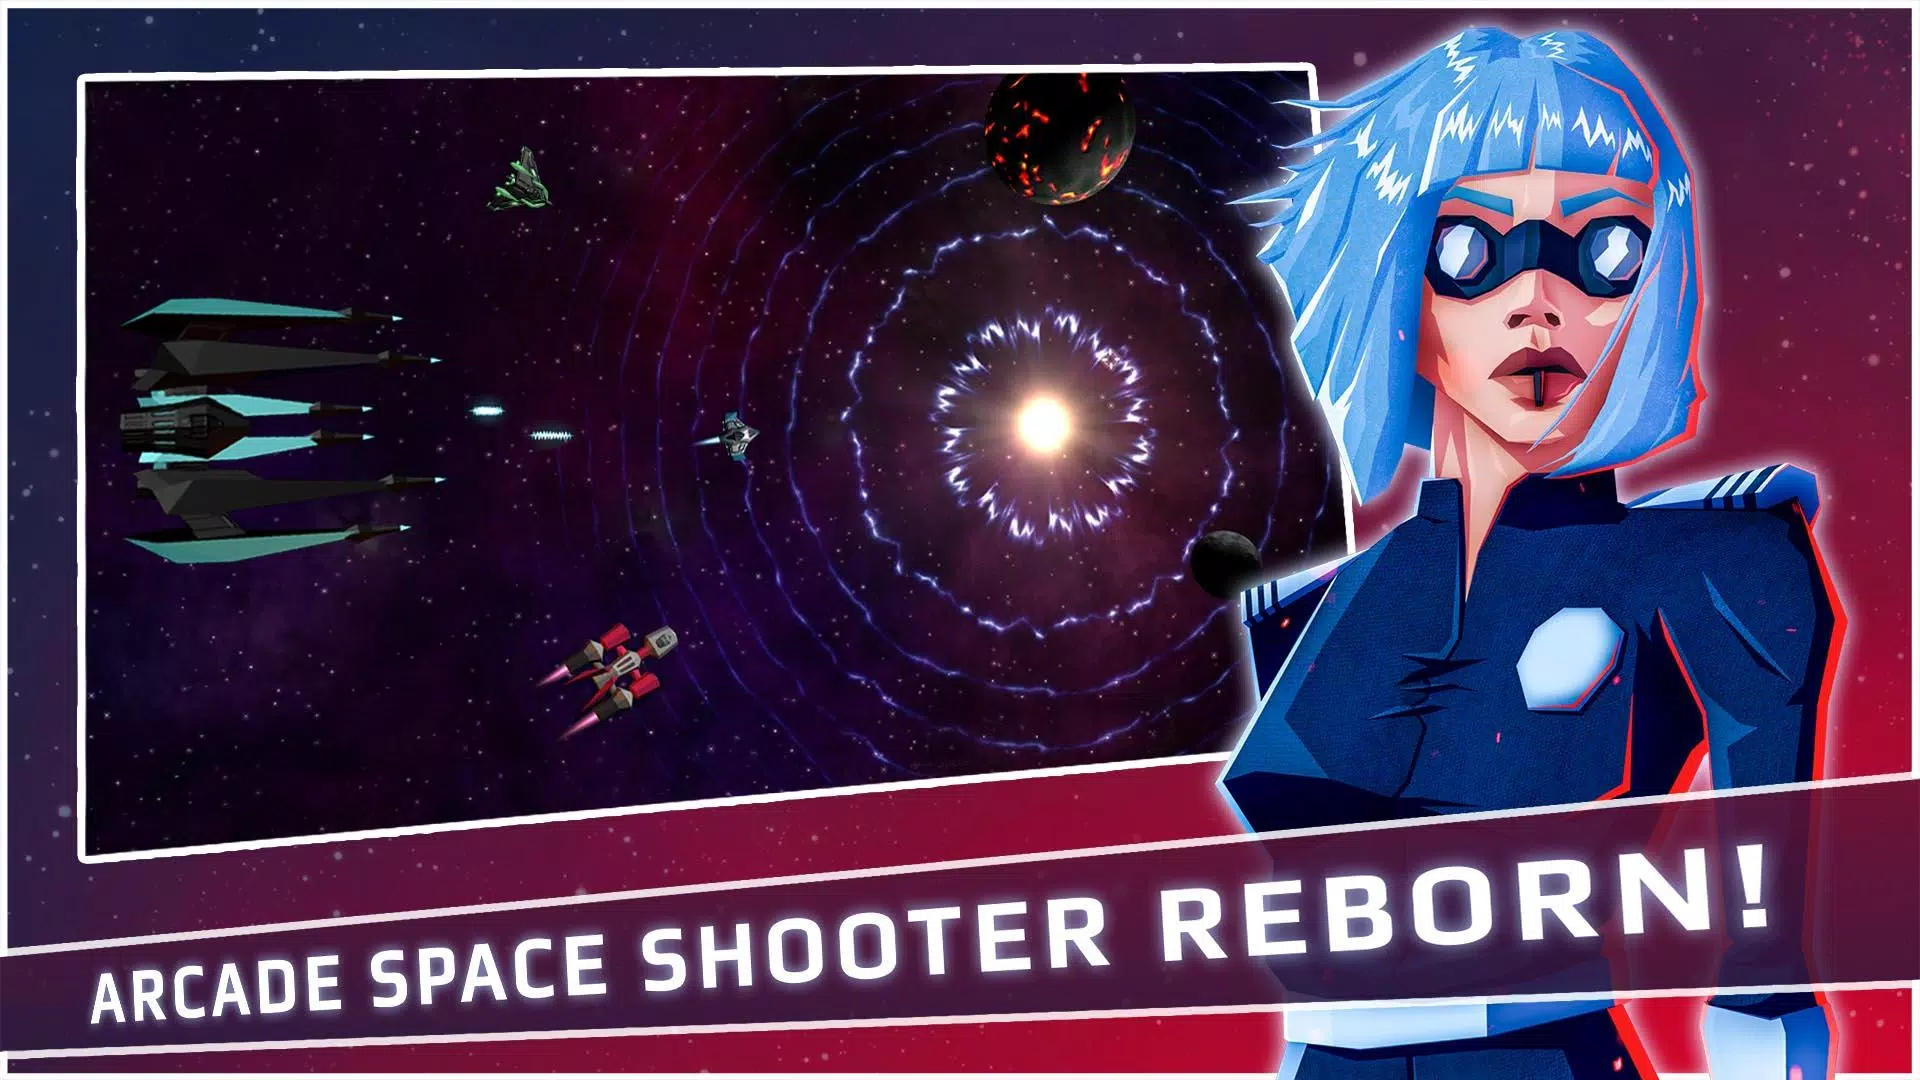 Starblast APK for Android Download